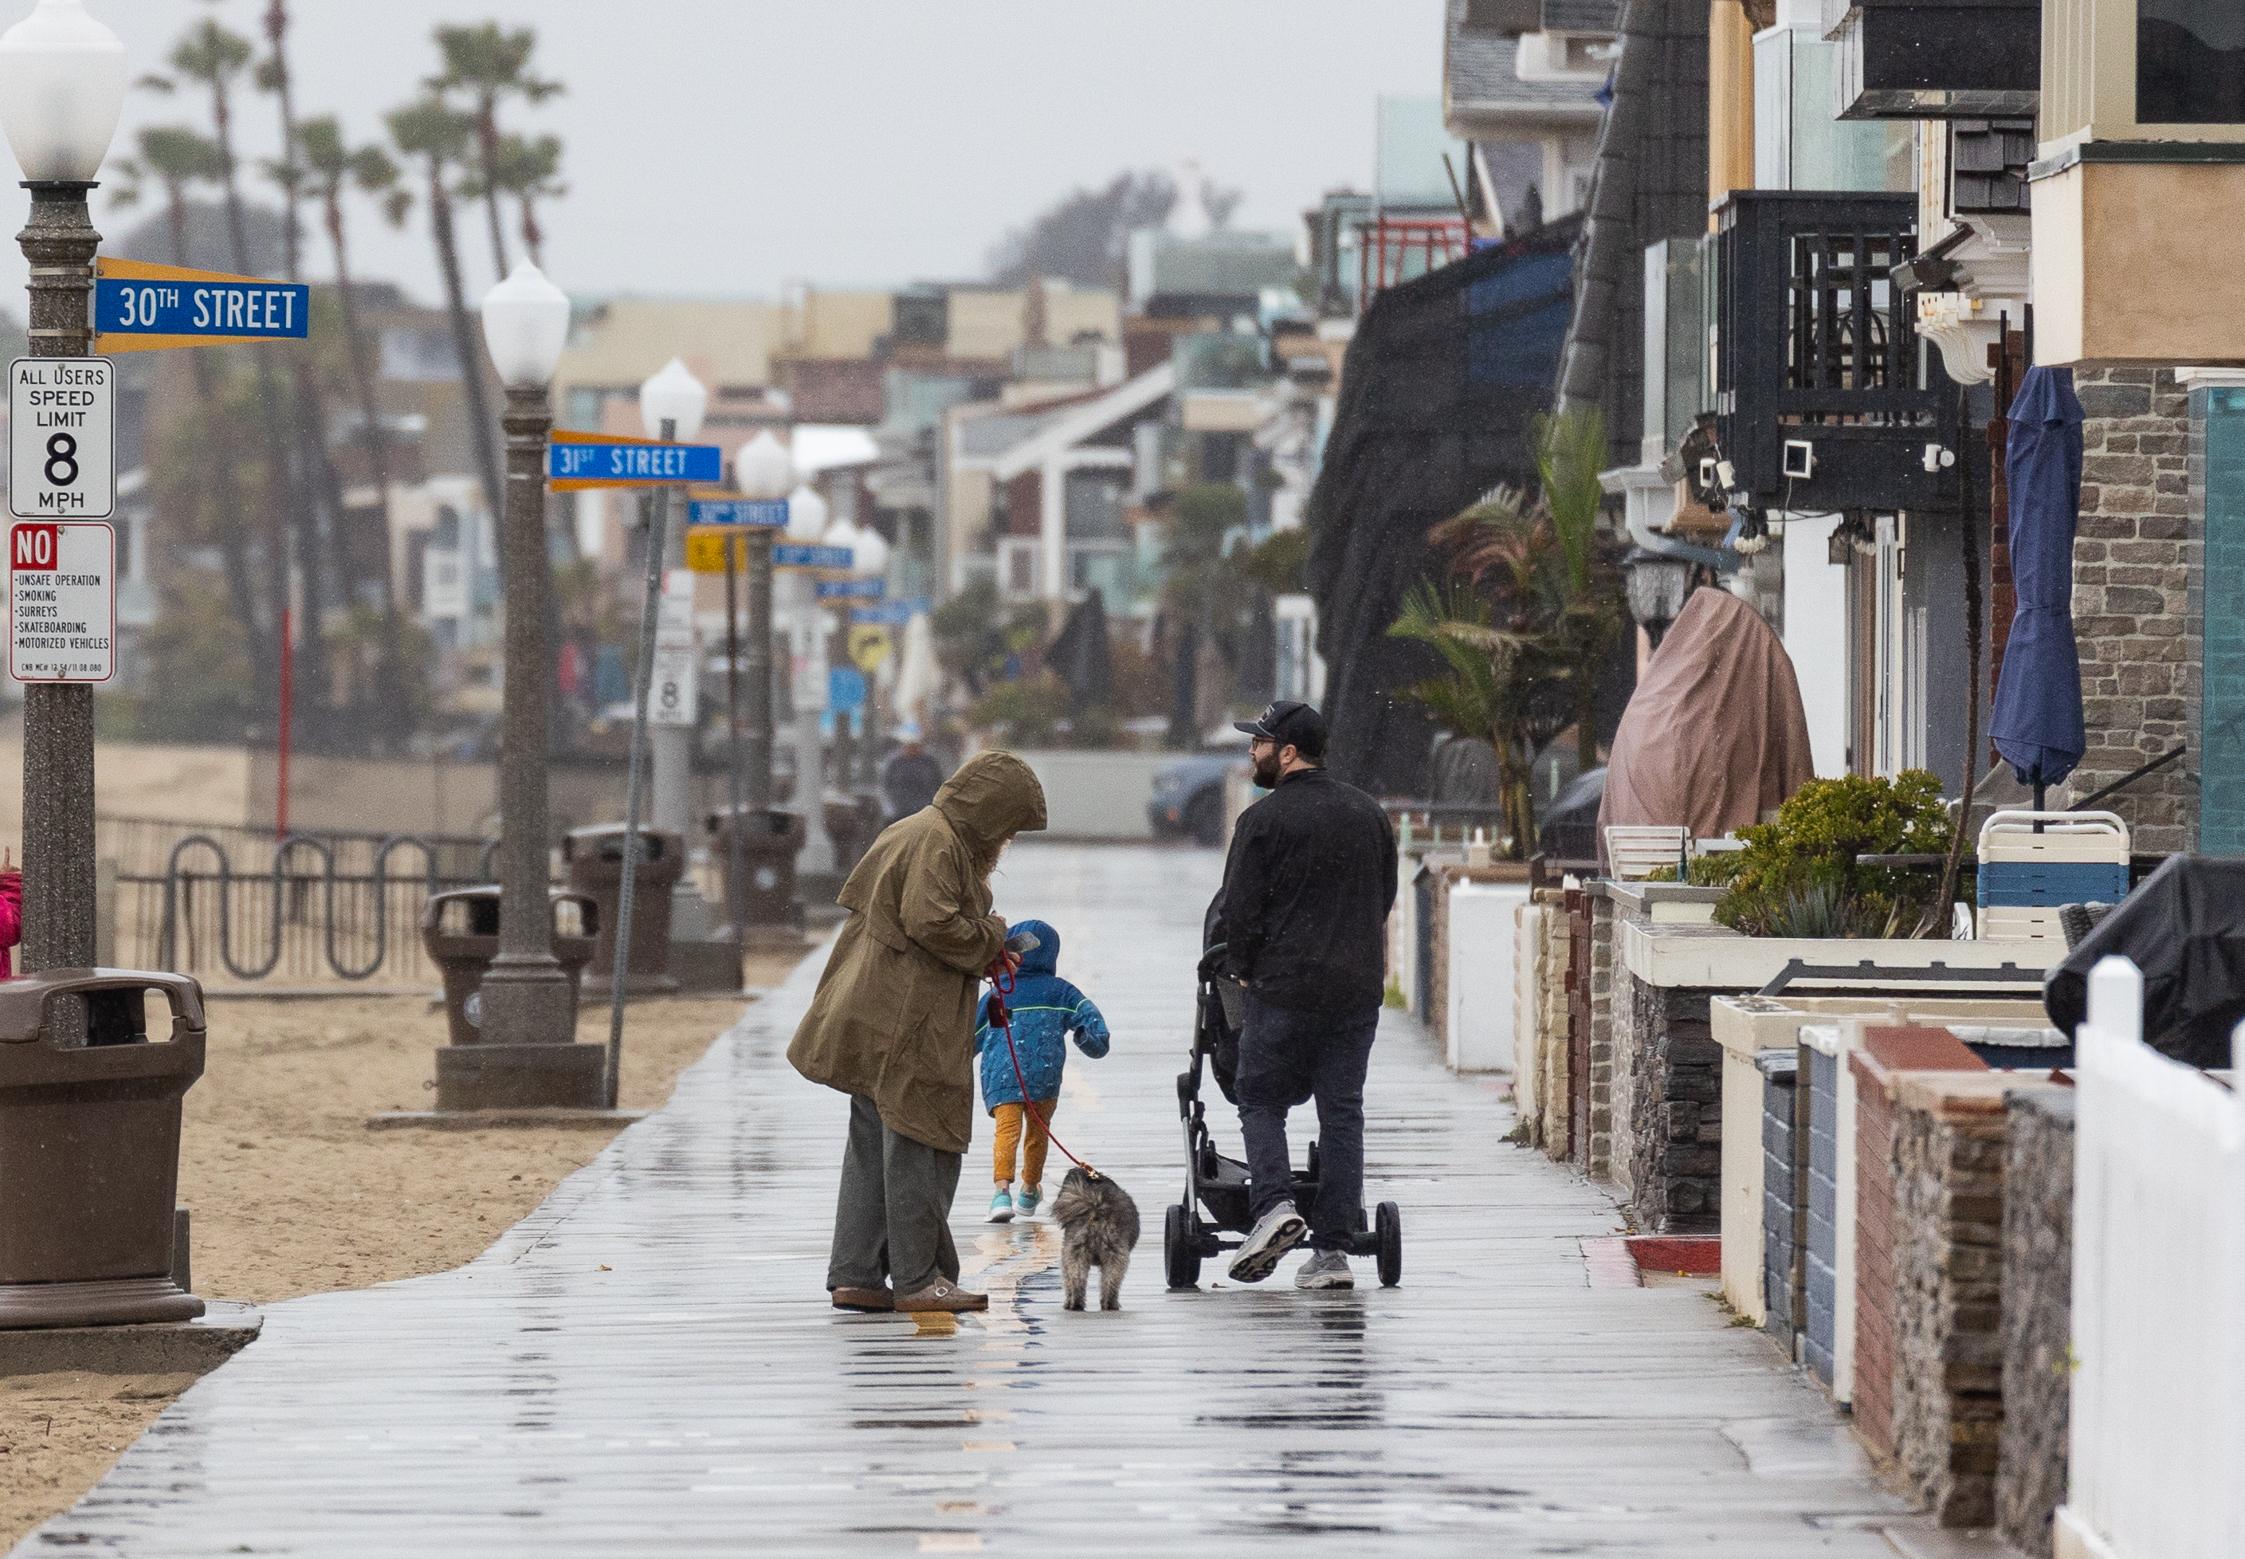 Slight Chance of Twister in Southern California as Storm Drenches State